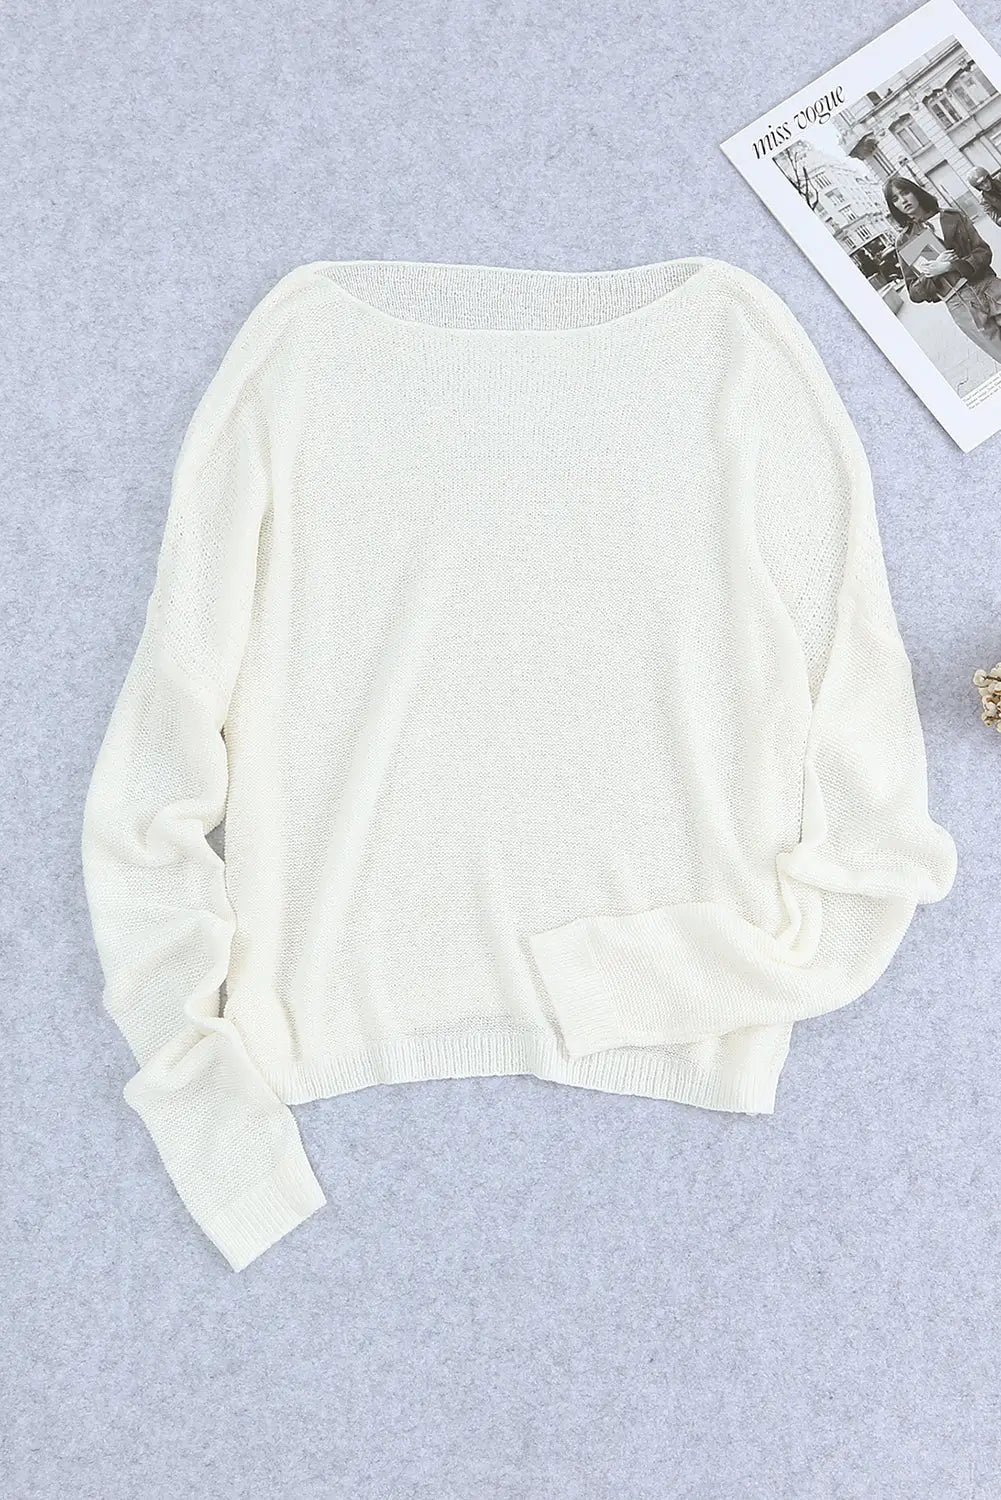 Apricot solid drop shoulder pullover sweater - tops